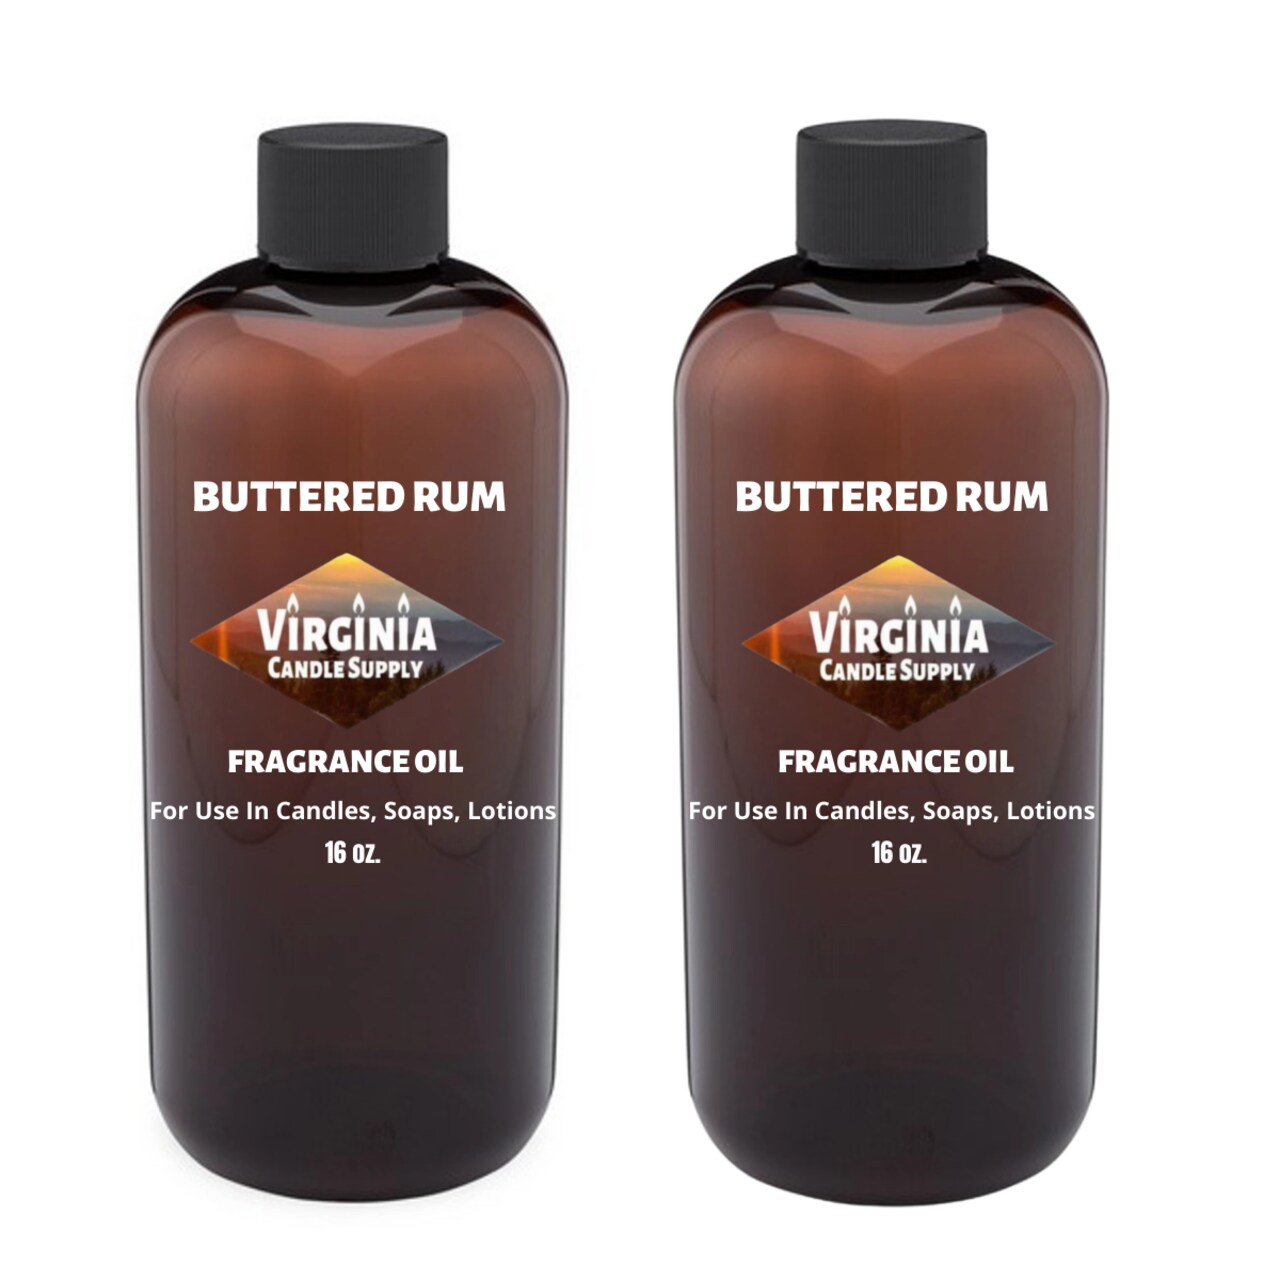 Buttered Rum Fragrance Oil (Our Version of the Brand Name) (32 oz Bottle) for Candle Making, Soap Making, Tart Making, Room Sprays, Lotions, Car Fresheners, Slime, Bath Bombs, Warmers&#x2026;